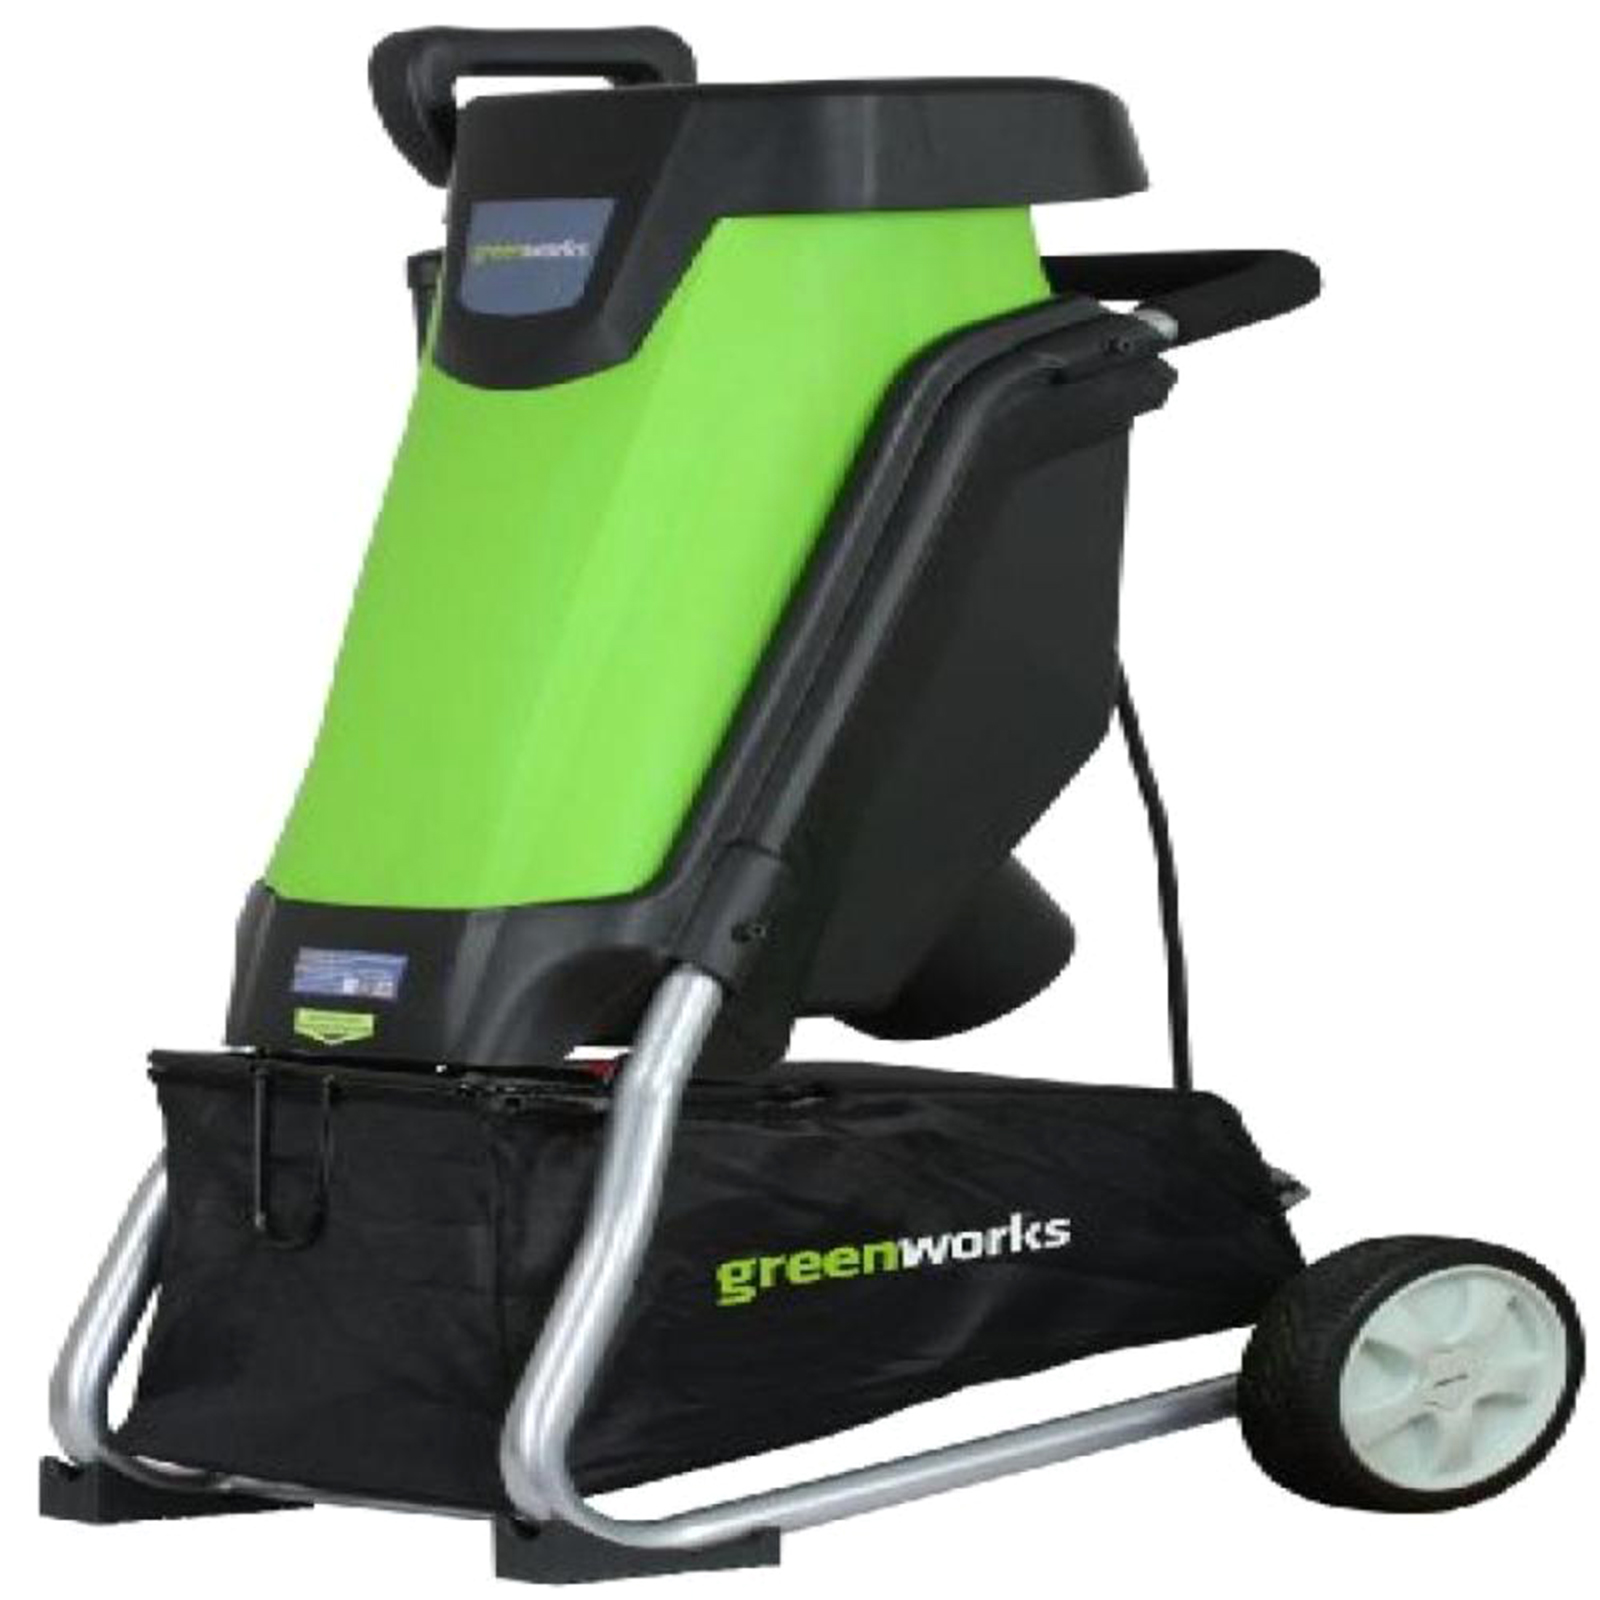 Greenworks 24052  29" 15A Portable Corded Electric Shredder/Chipper with Steel Blades